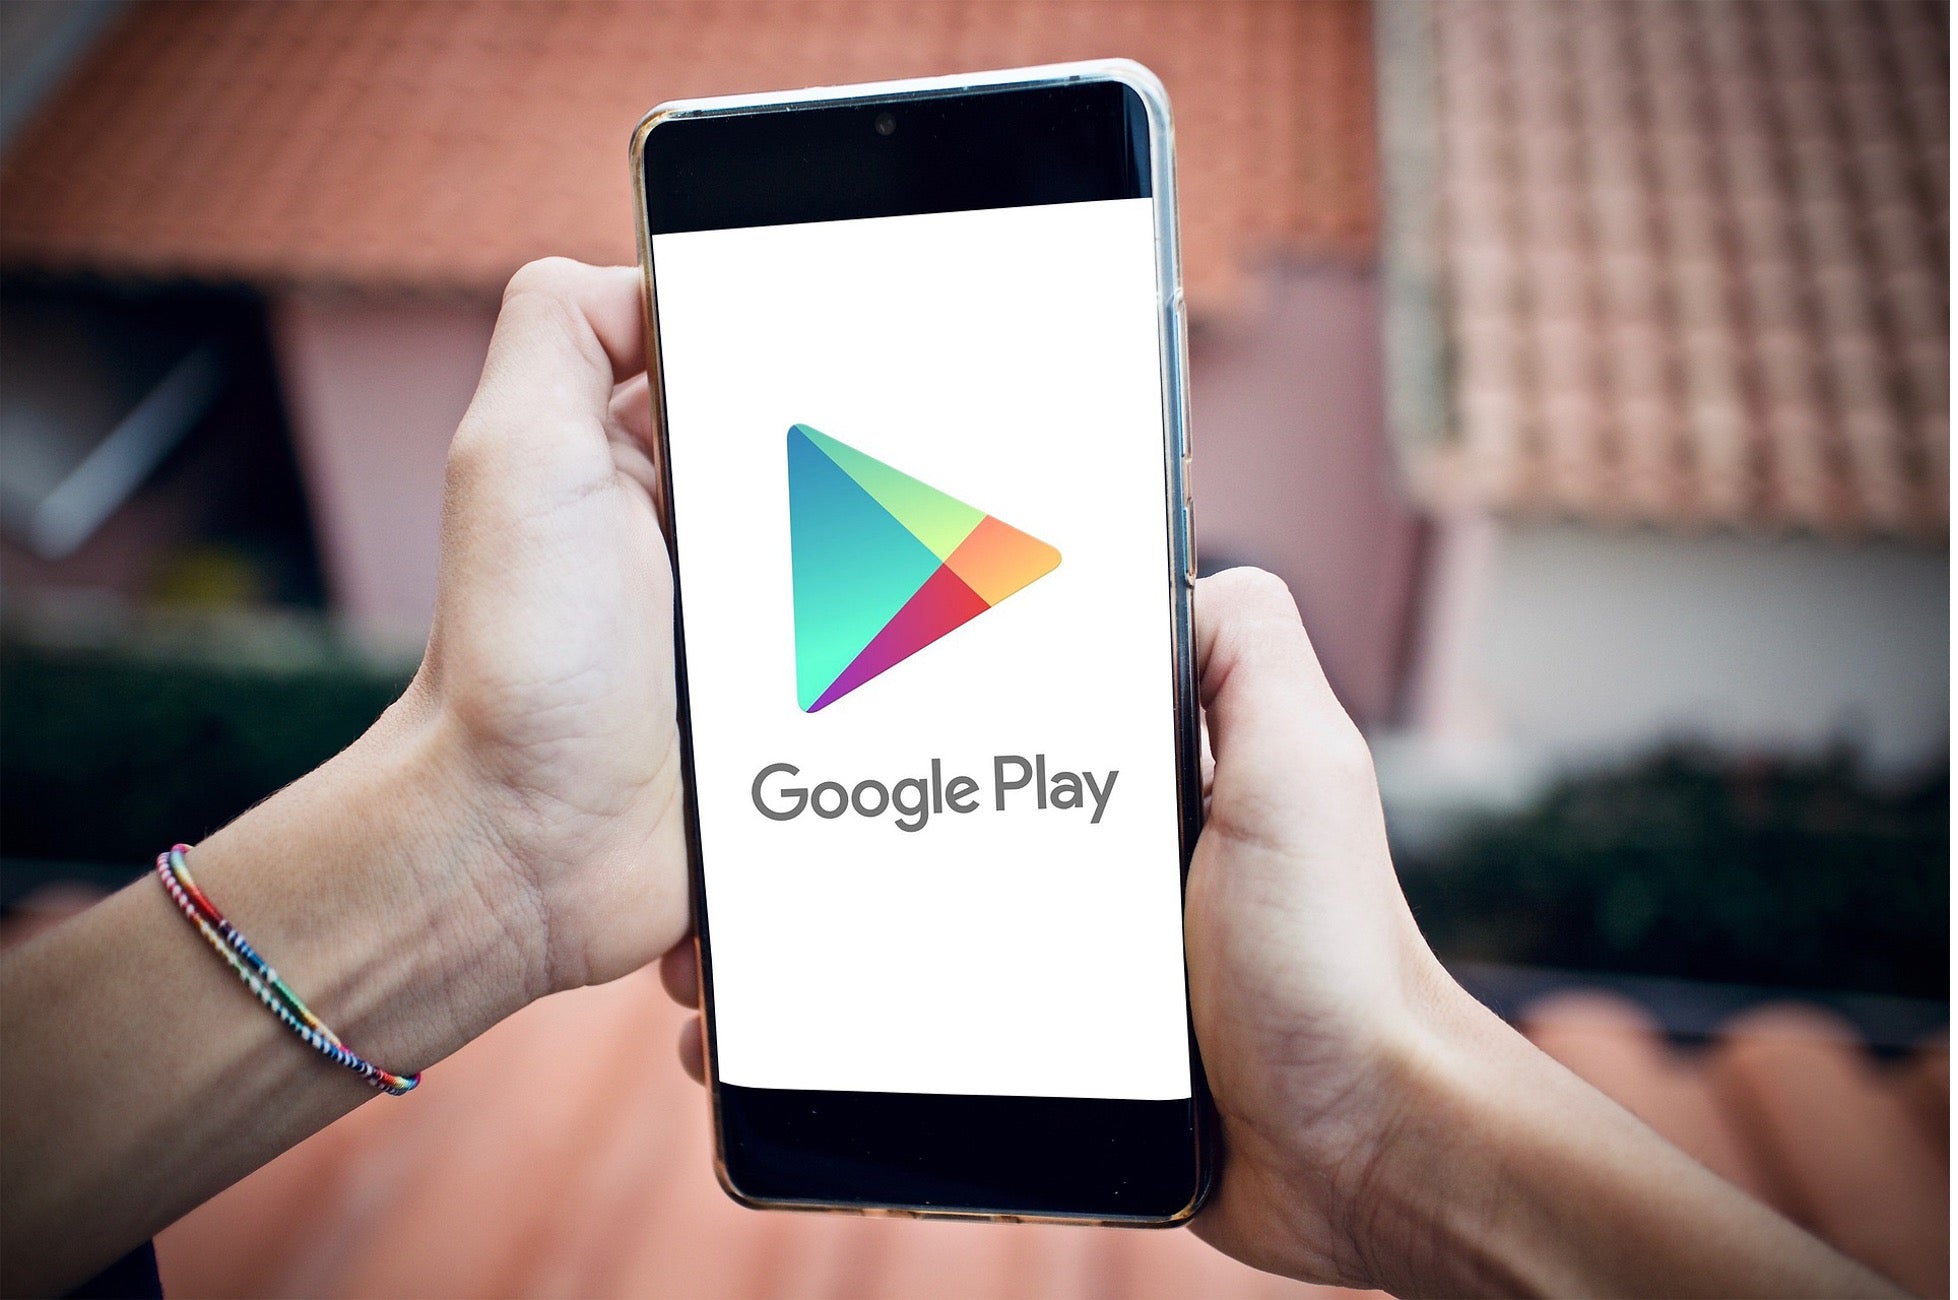 How to Get Free Google Play Gift Cards Easily